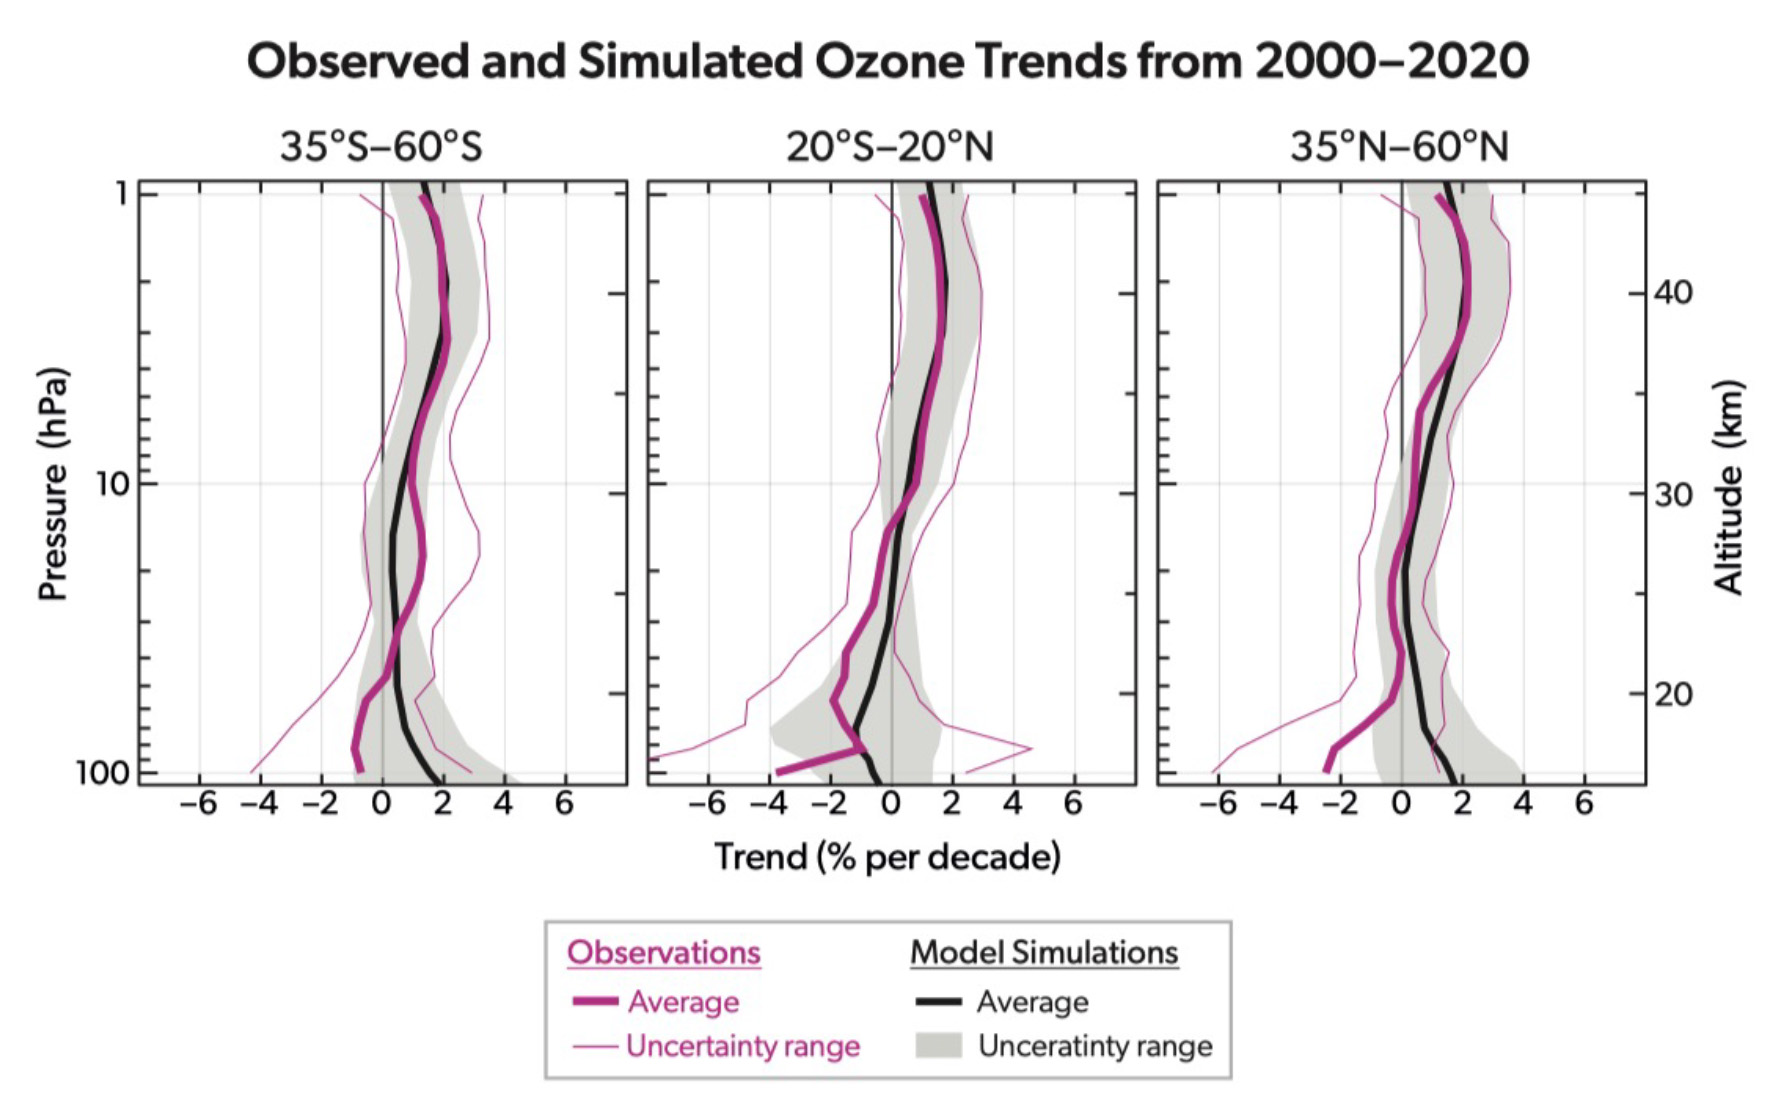 MLS data were central to many of the conclusions, including those for ozone trends